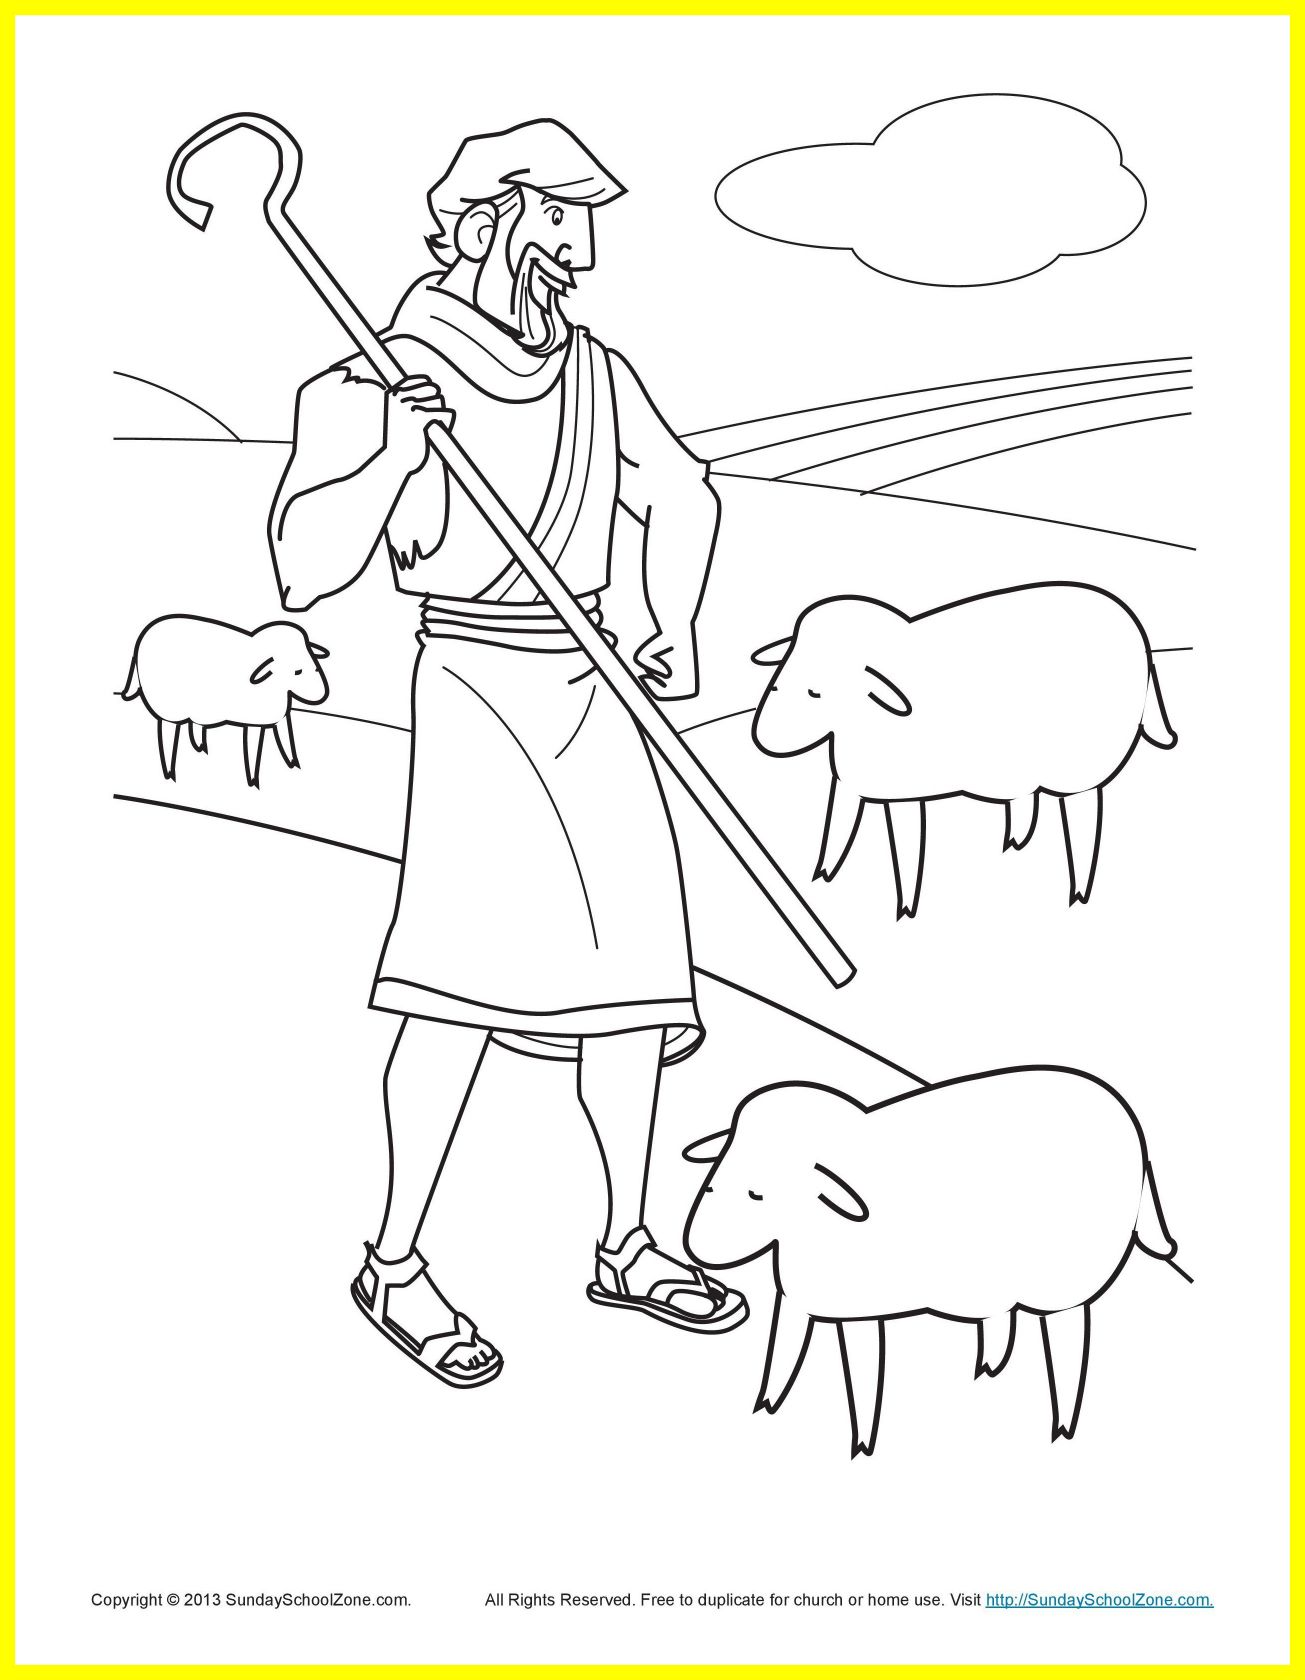 David The Shepherd Boy Coloring Pages at GetColorings.com | Free